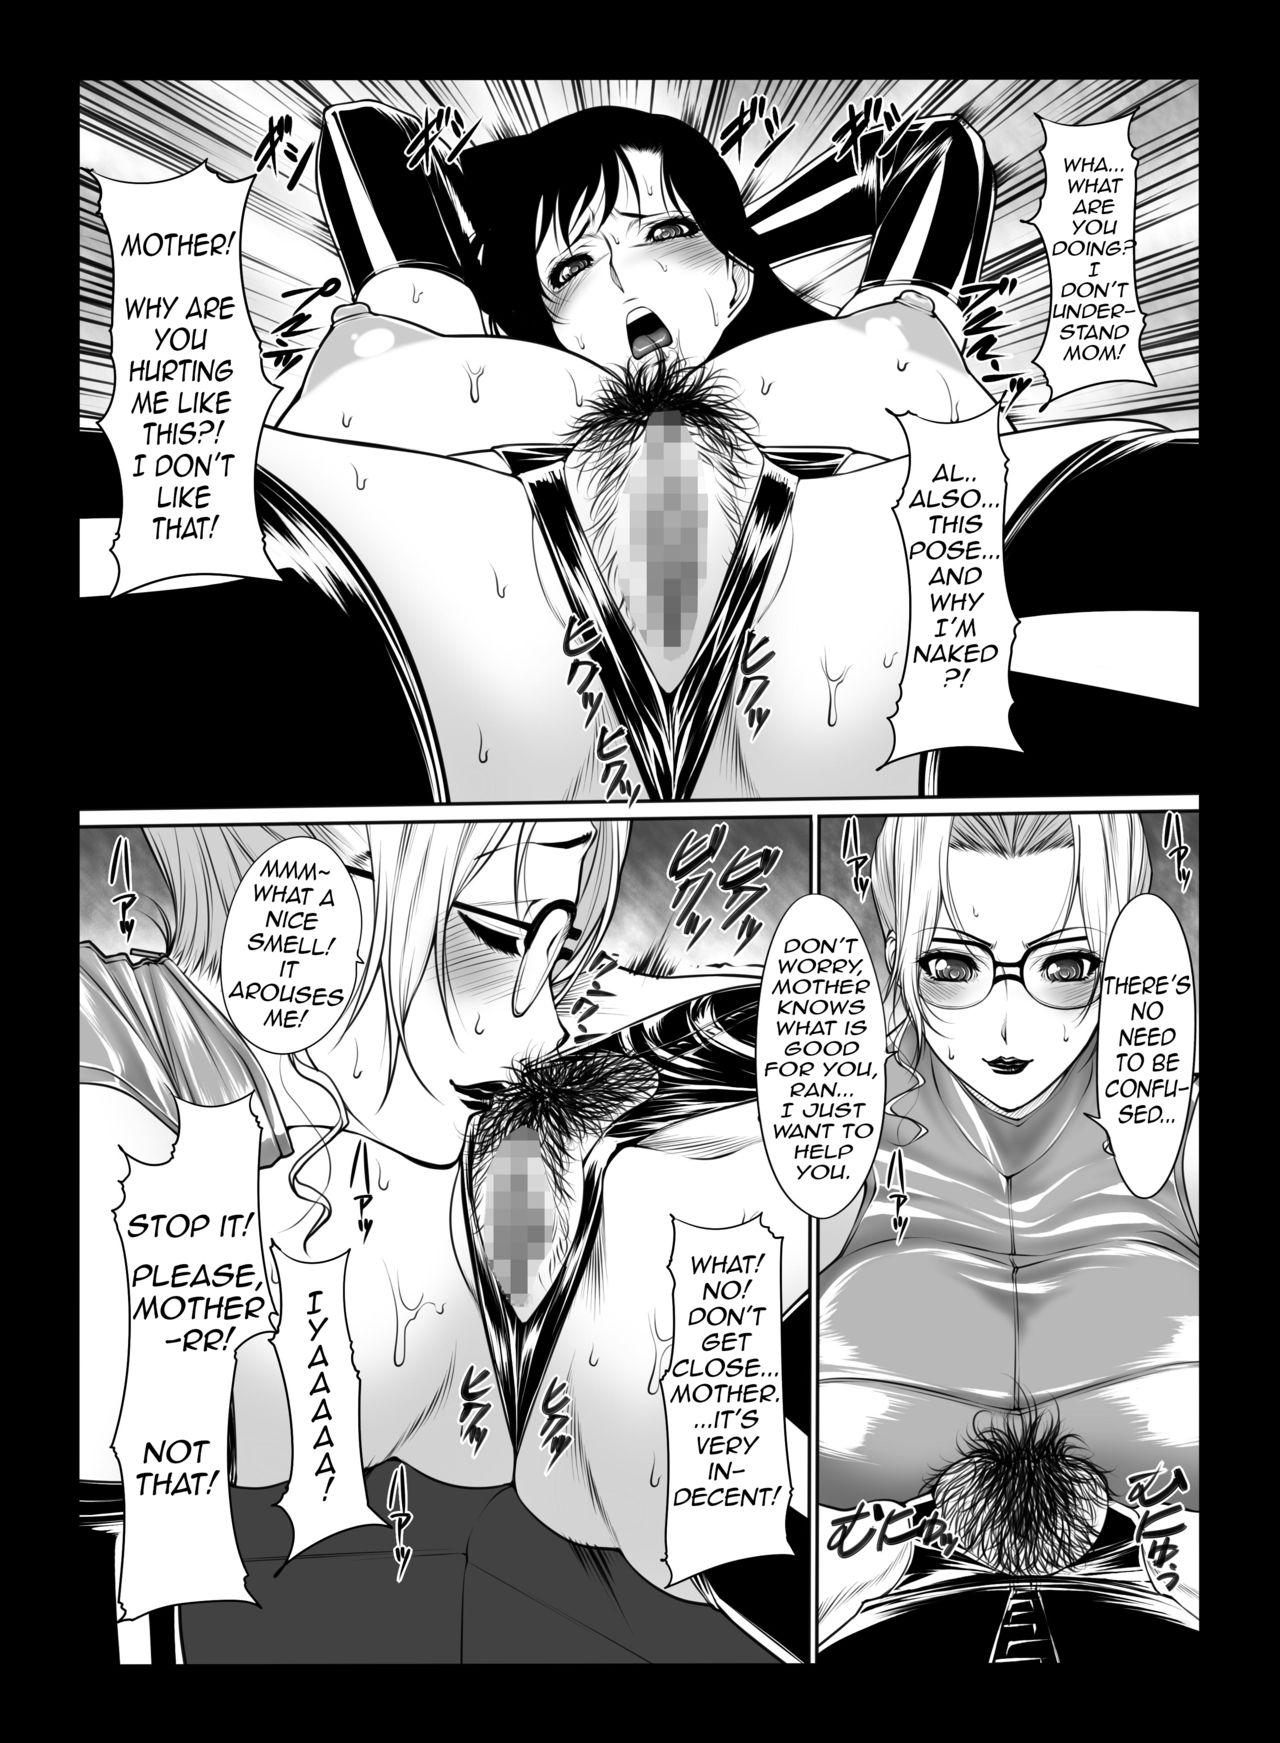 Glory Hole The Incestuous Daily Life of Ms. Kisaki - Detective conan Free Hardcore - Page 7